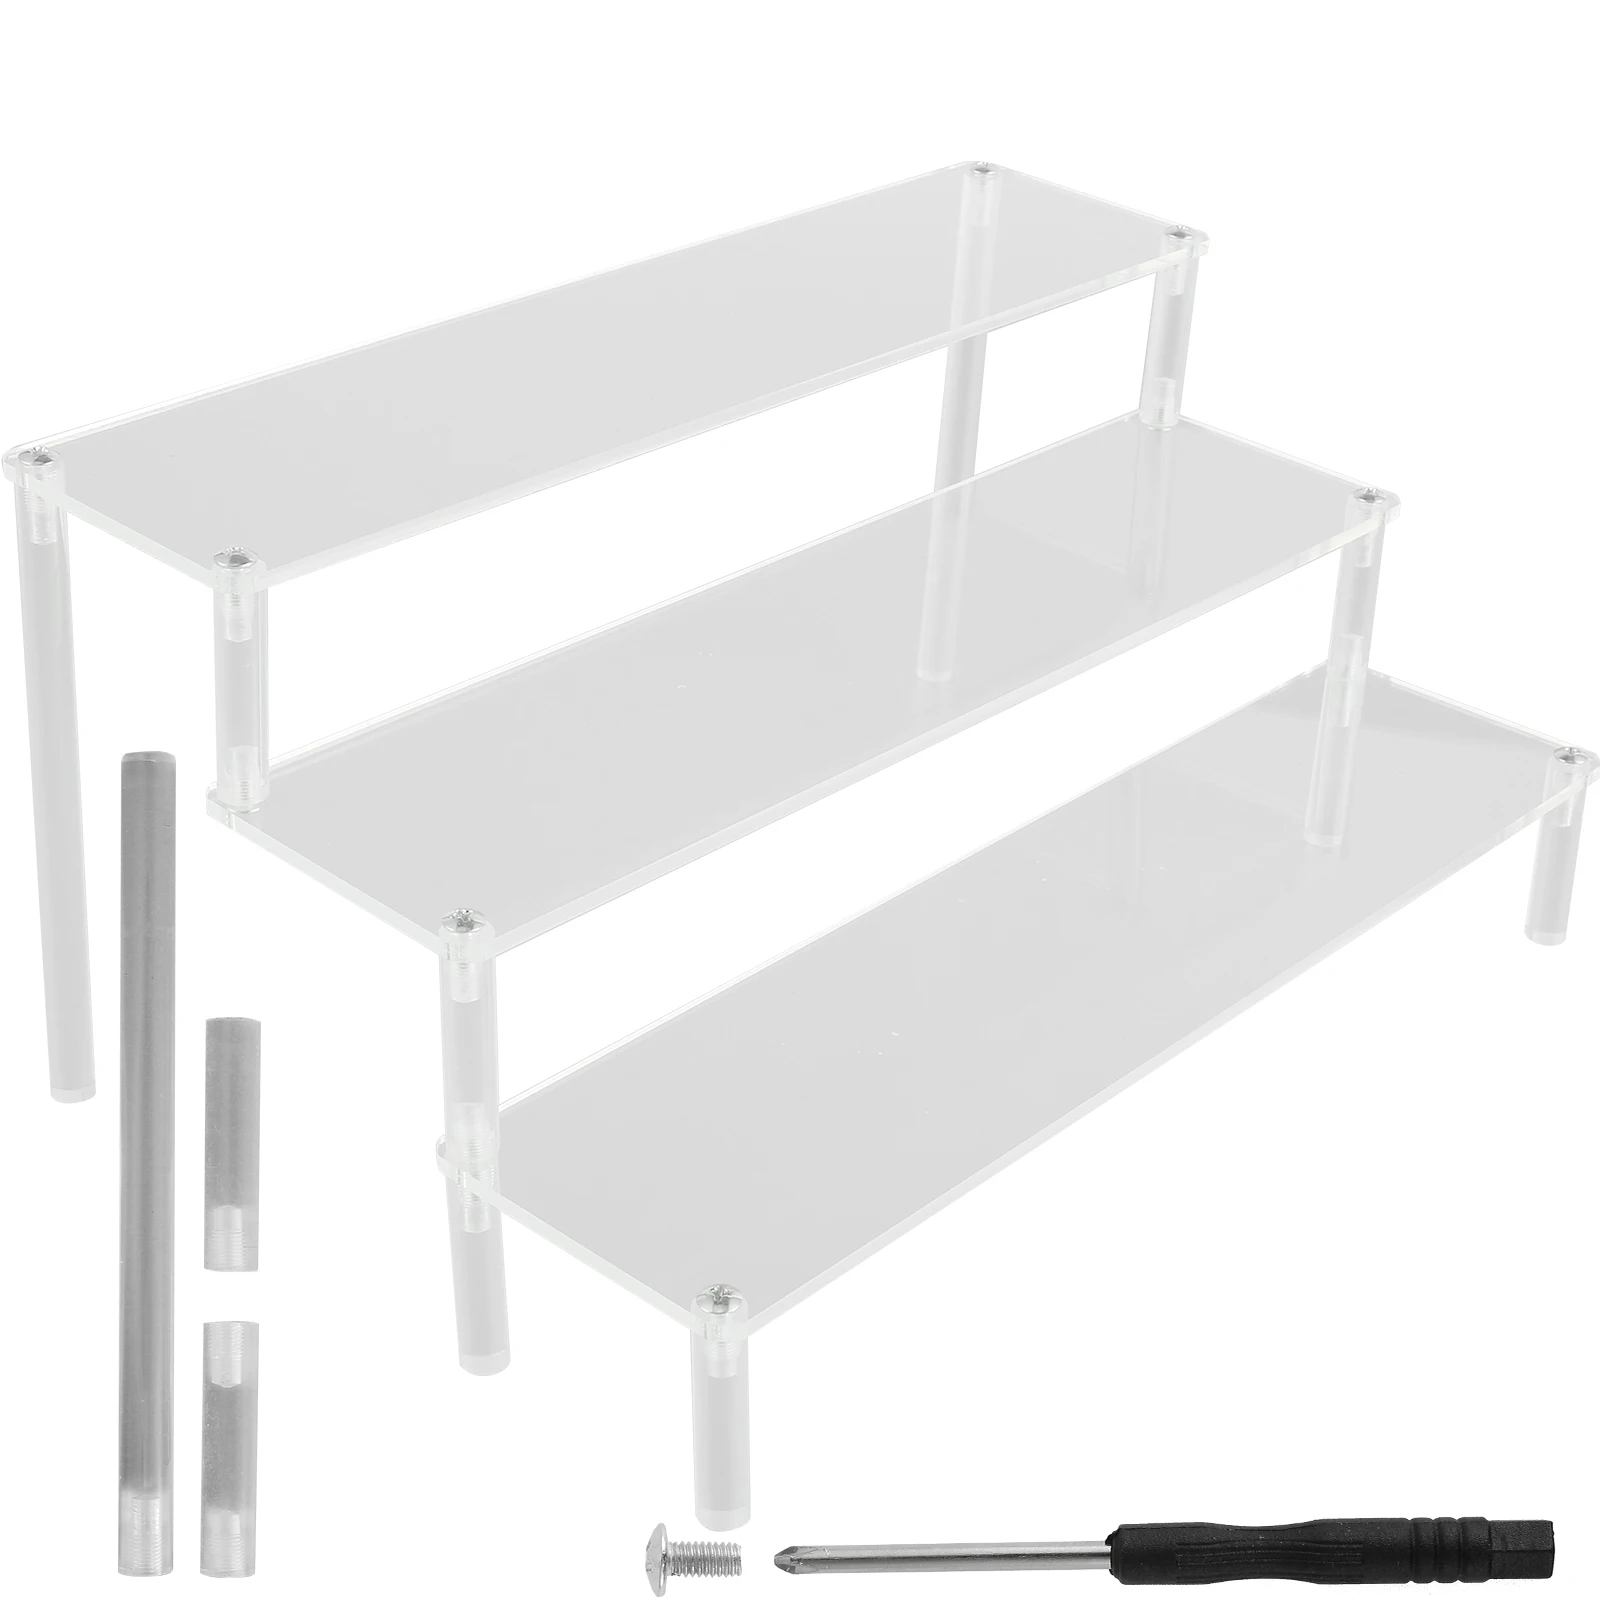 Acrylic Risers Display Stand 3 Tier Acrylic Tiered Shelf Clear Tiered Display Or - £54.88 GBP